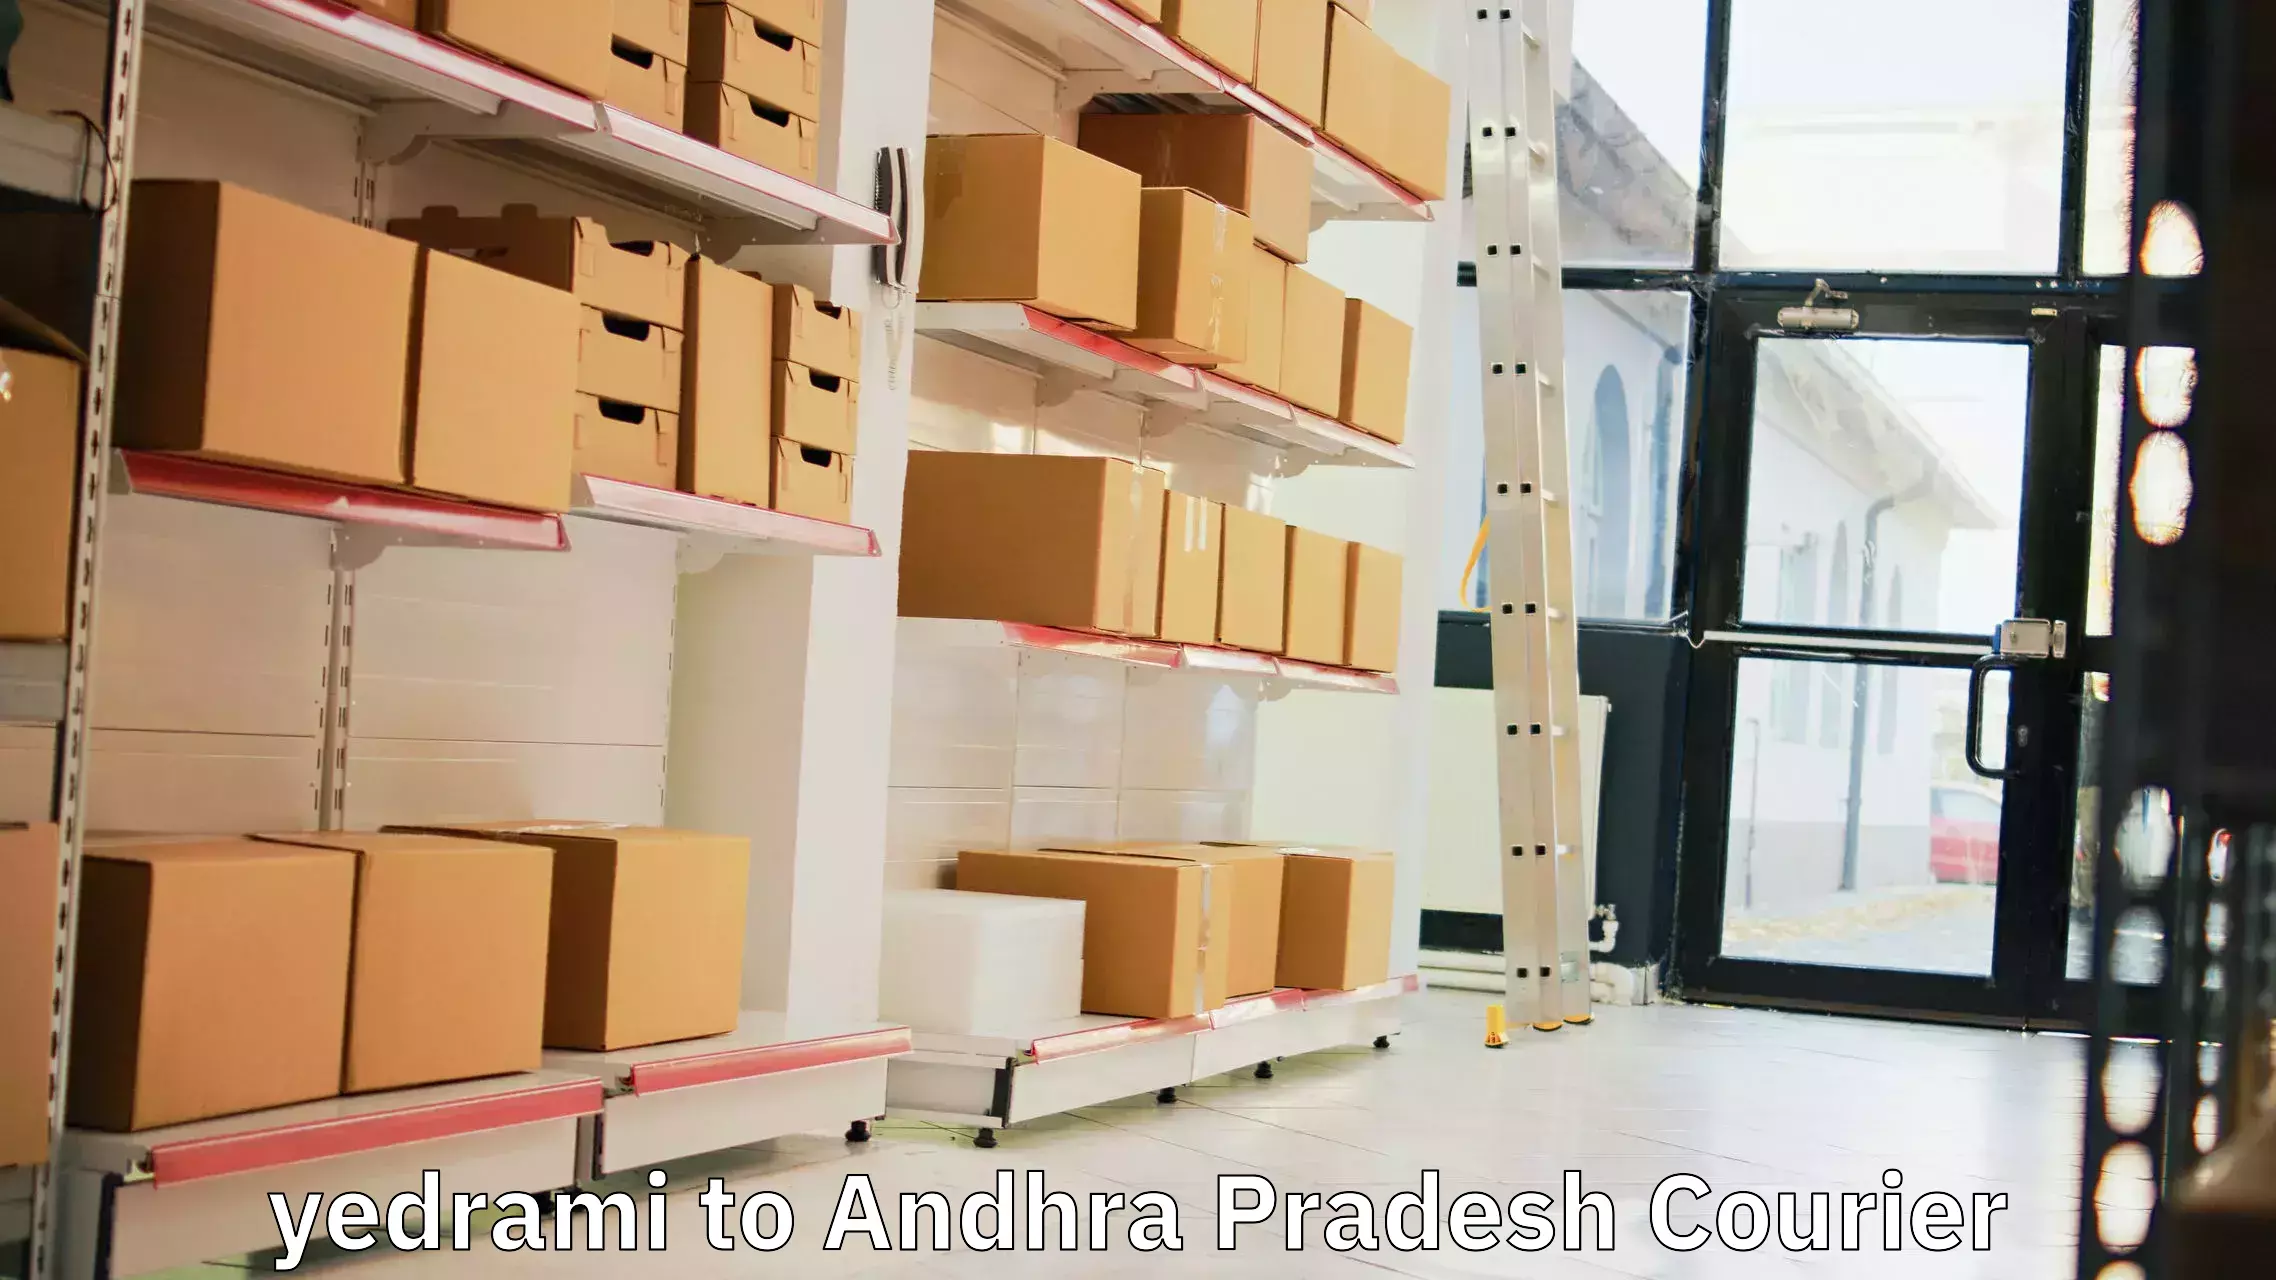 Automated shipping processes yedrami to Chirala